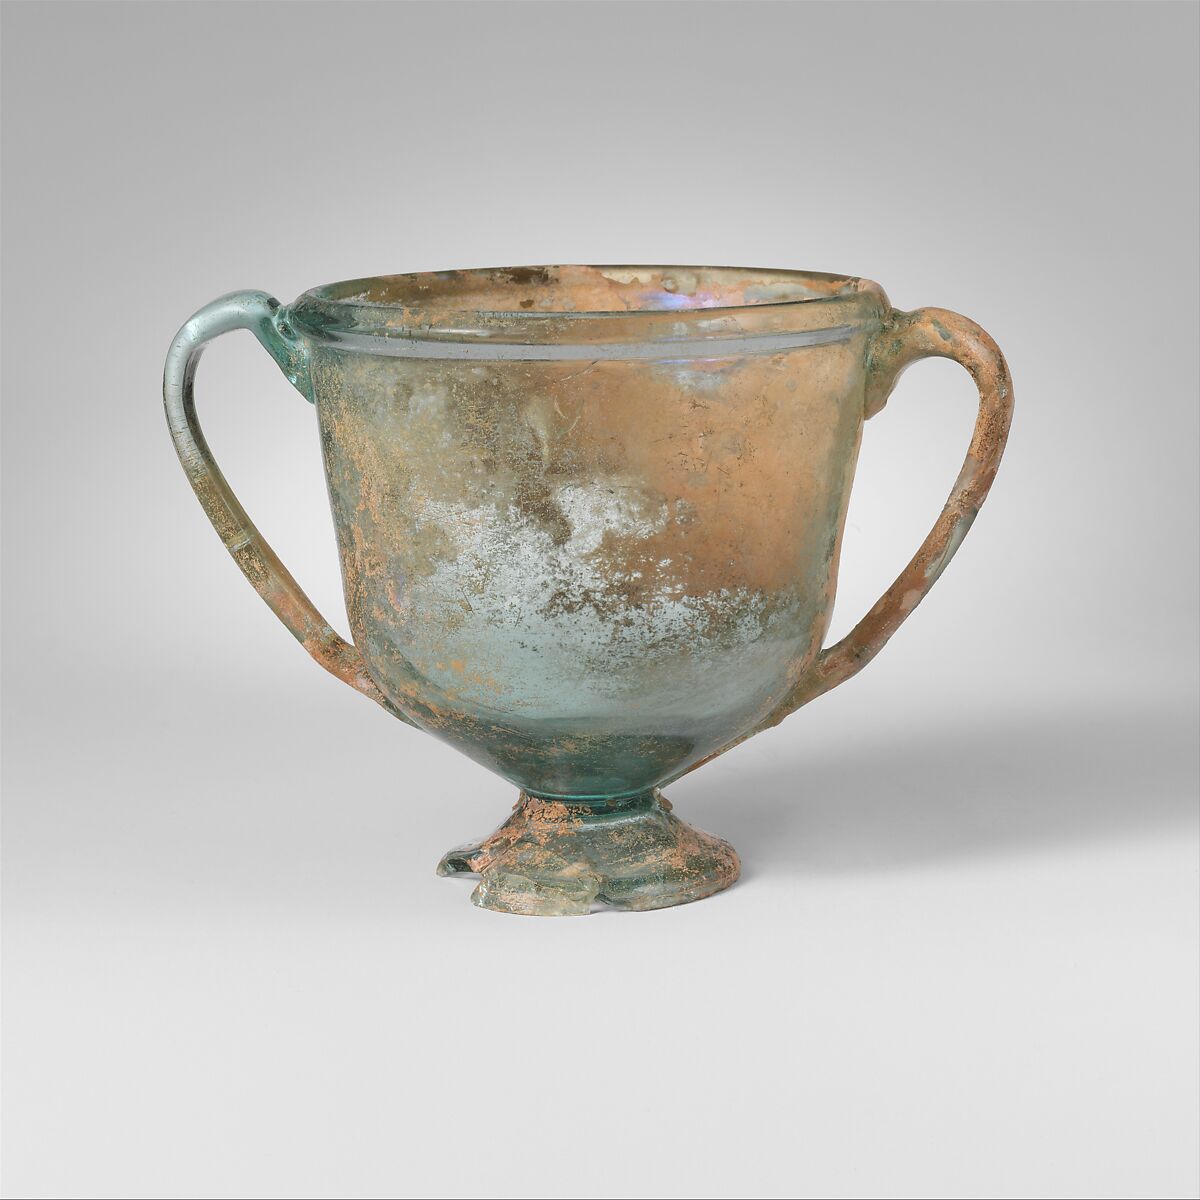 Glass cantharus (cup with two handles), Glass, Roman 